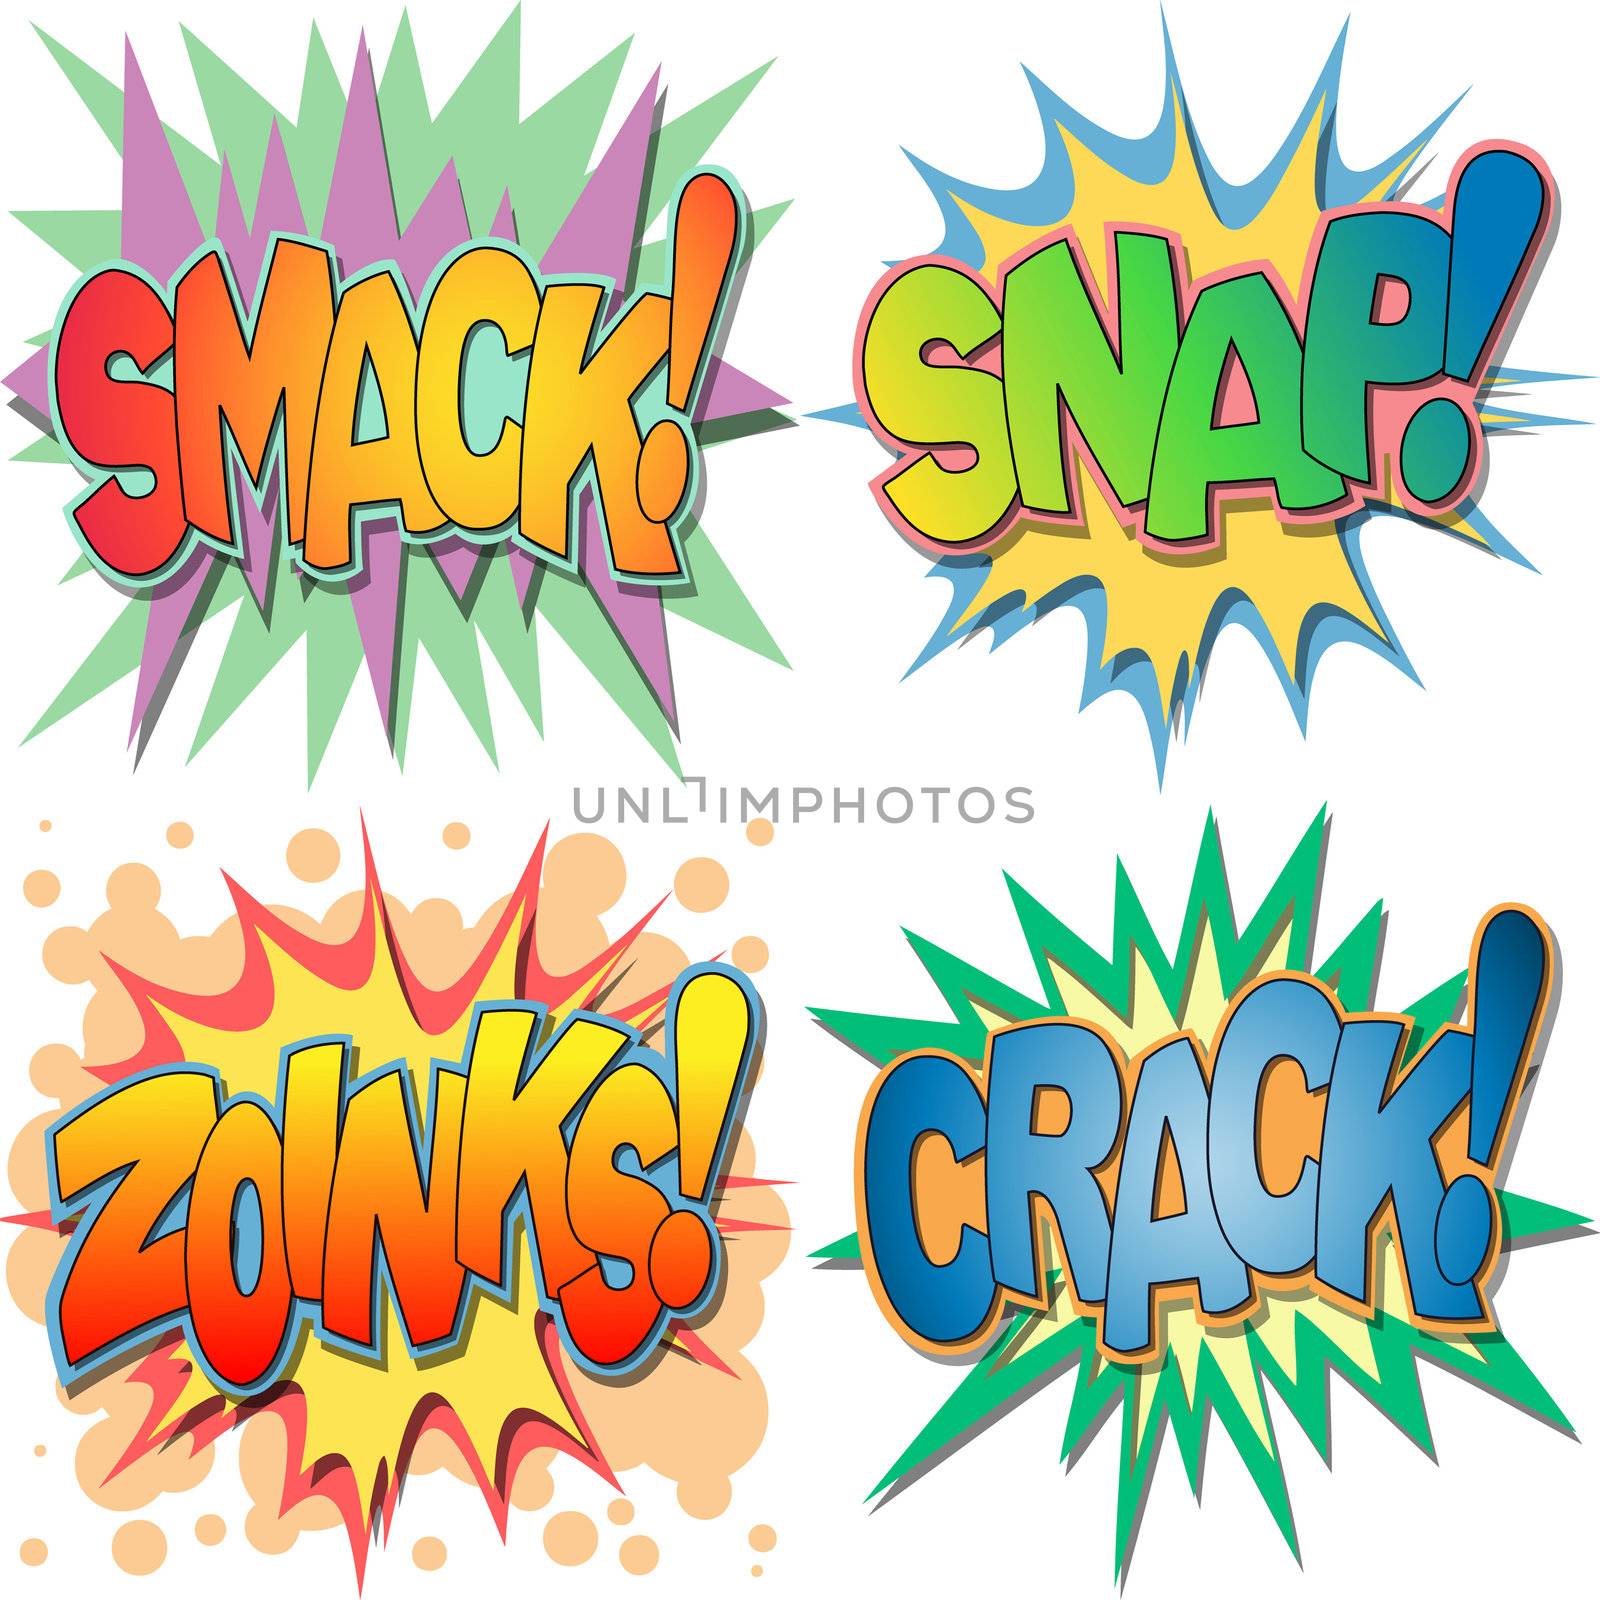 
A Selection of Comic Book Exclamations and Action Words, Smack, Snap, Zoinks, Crack.